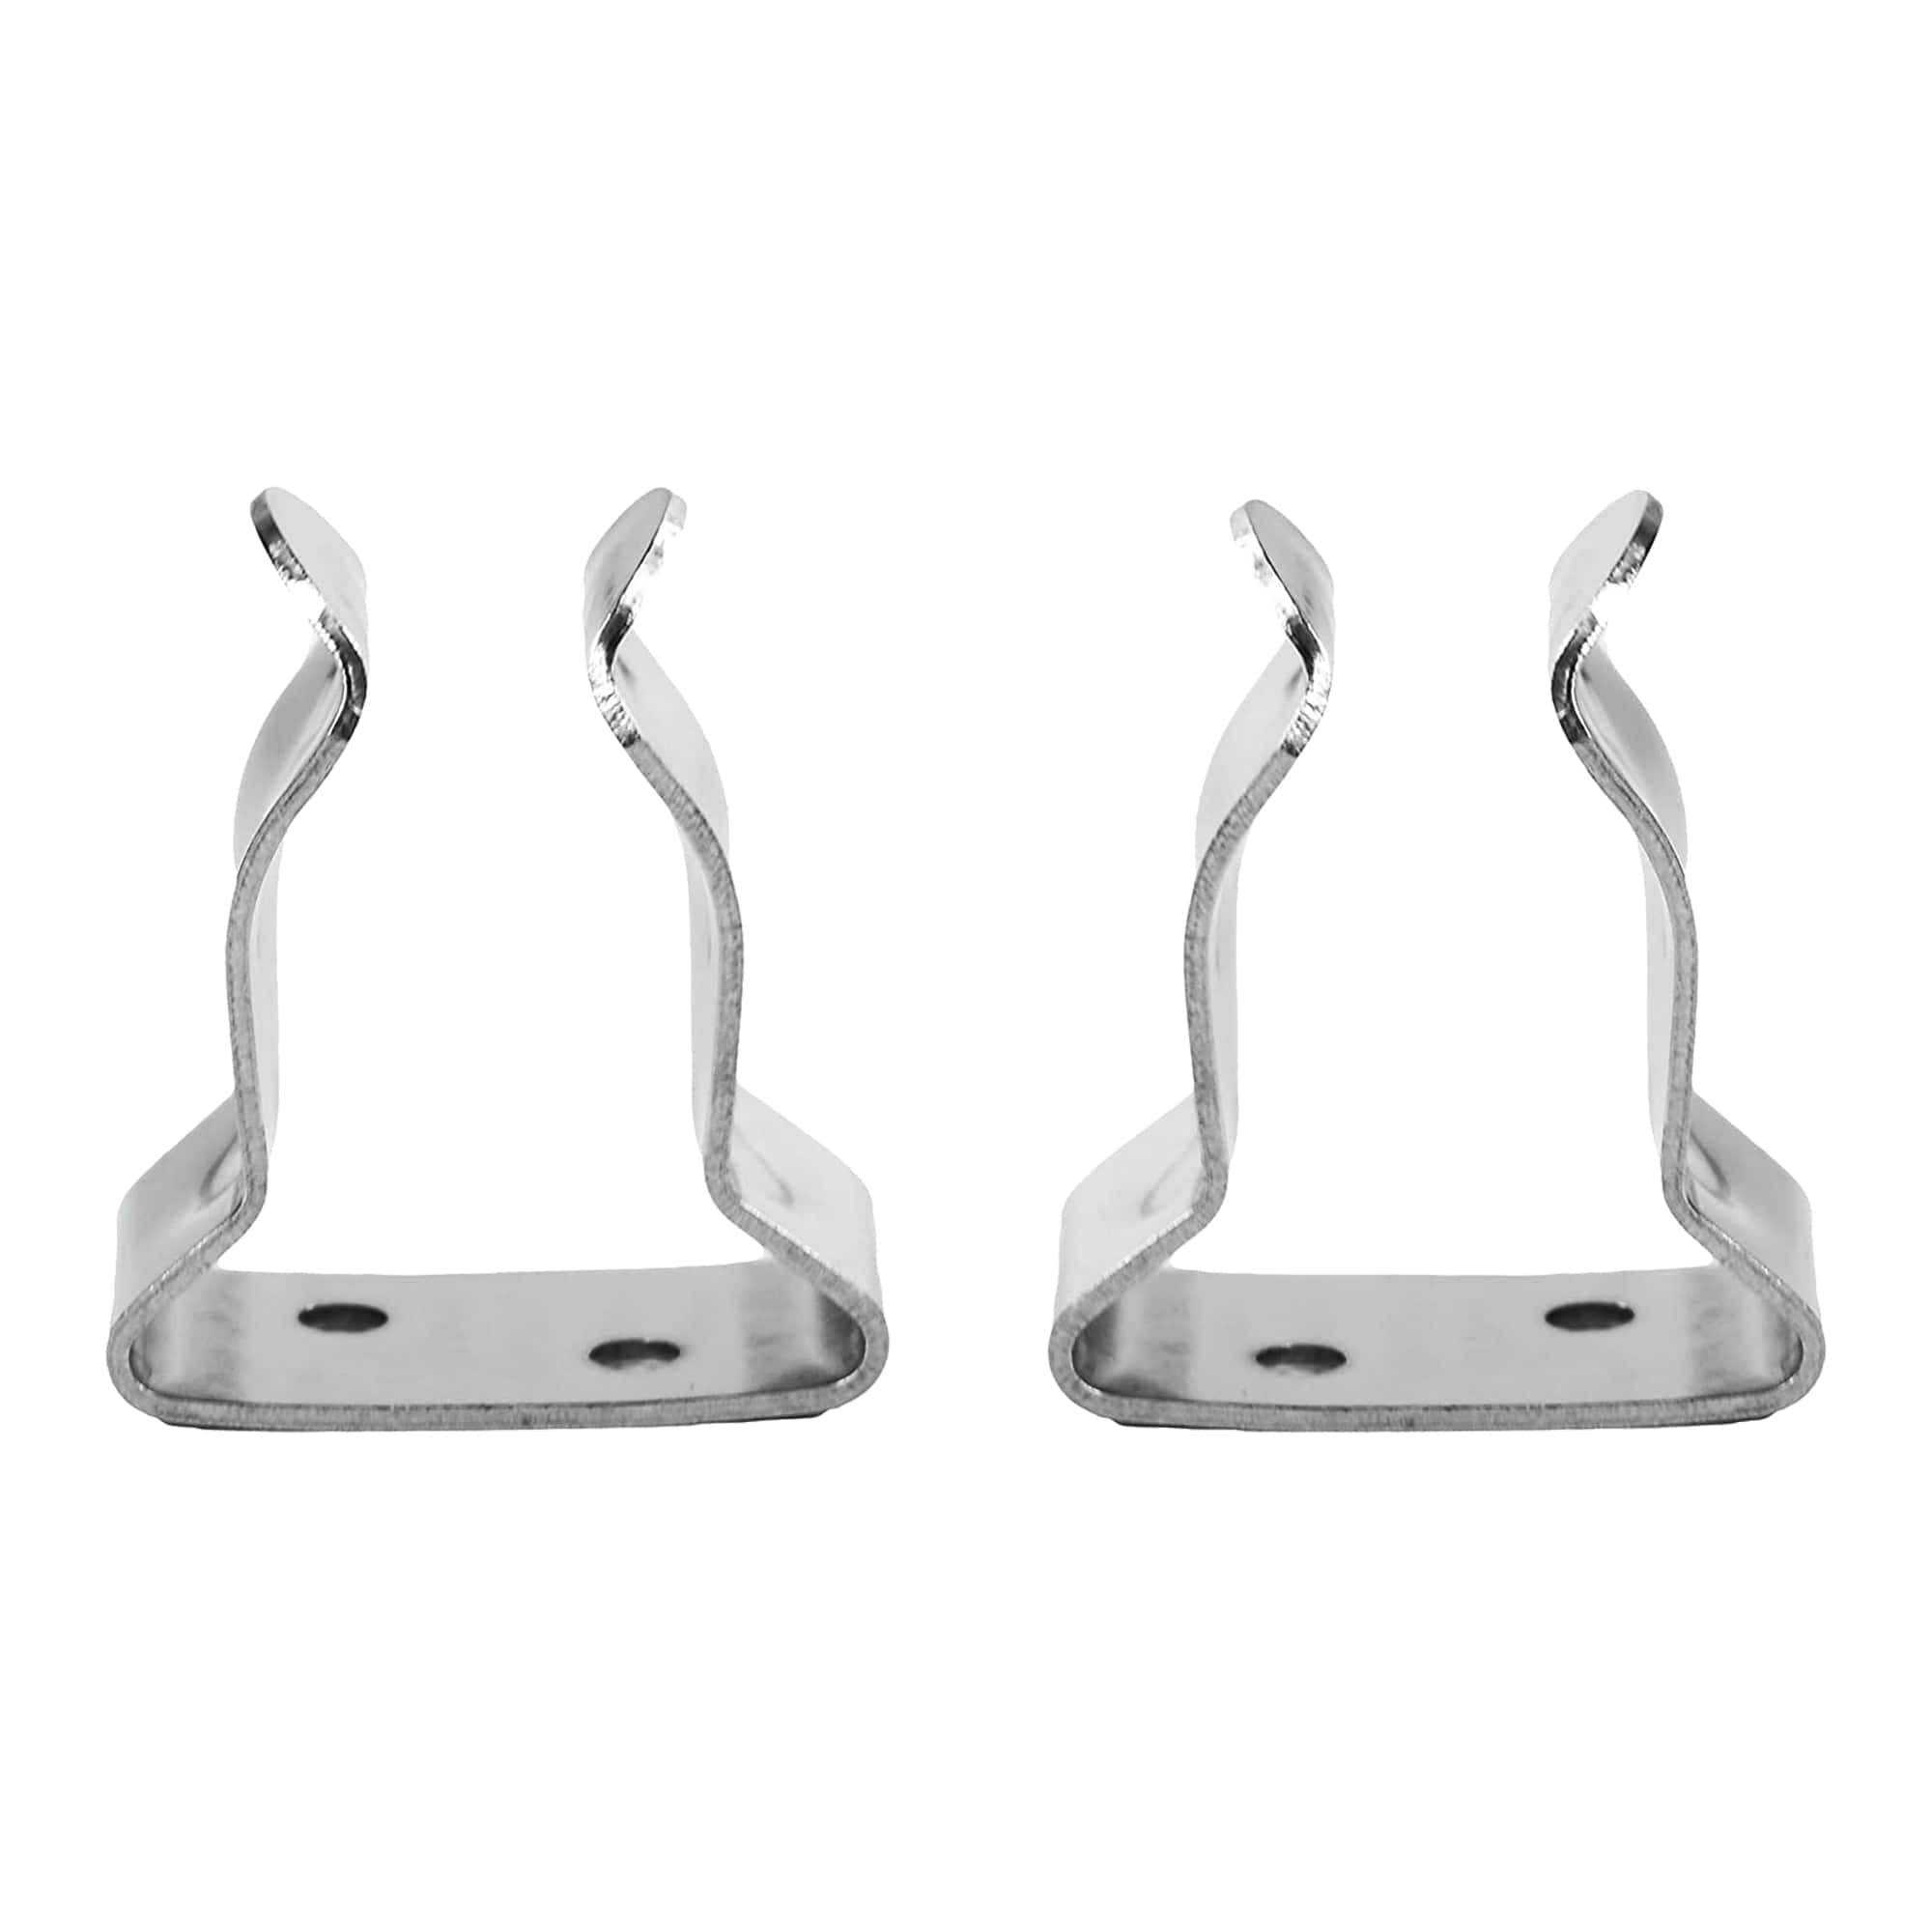 MARINE CITY Stainless-Steel Fine Polished General-Purpose Storage Clips  Strong and Sturdy Versatile Hook Spring Clamp Holders (5/8 Inches to 1  Inch) for Boats Ships Marines (Pack of 2)